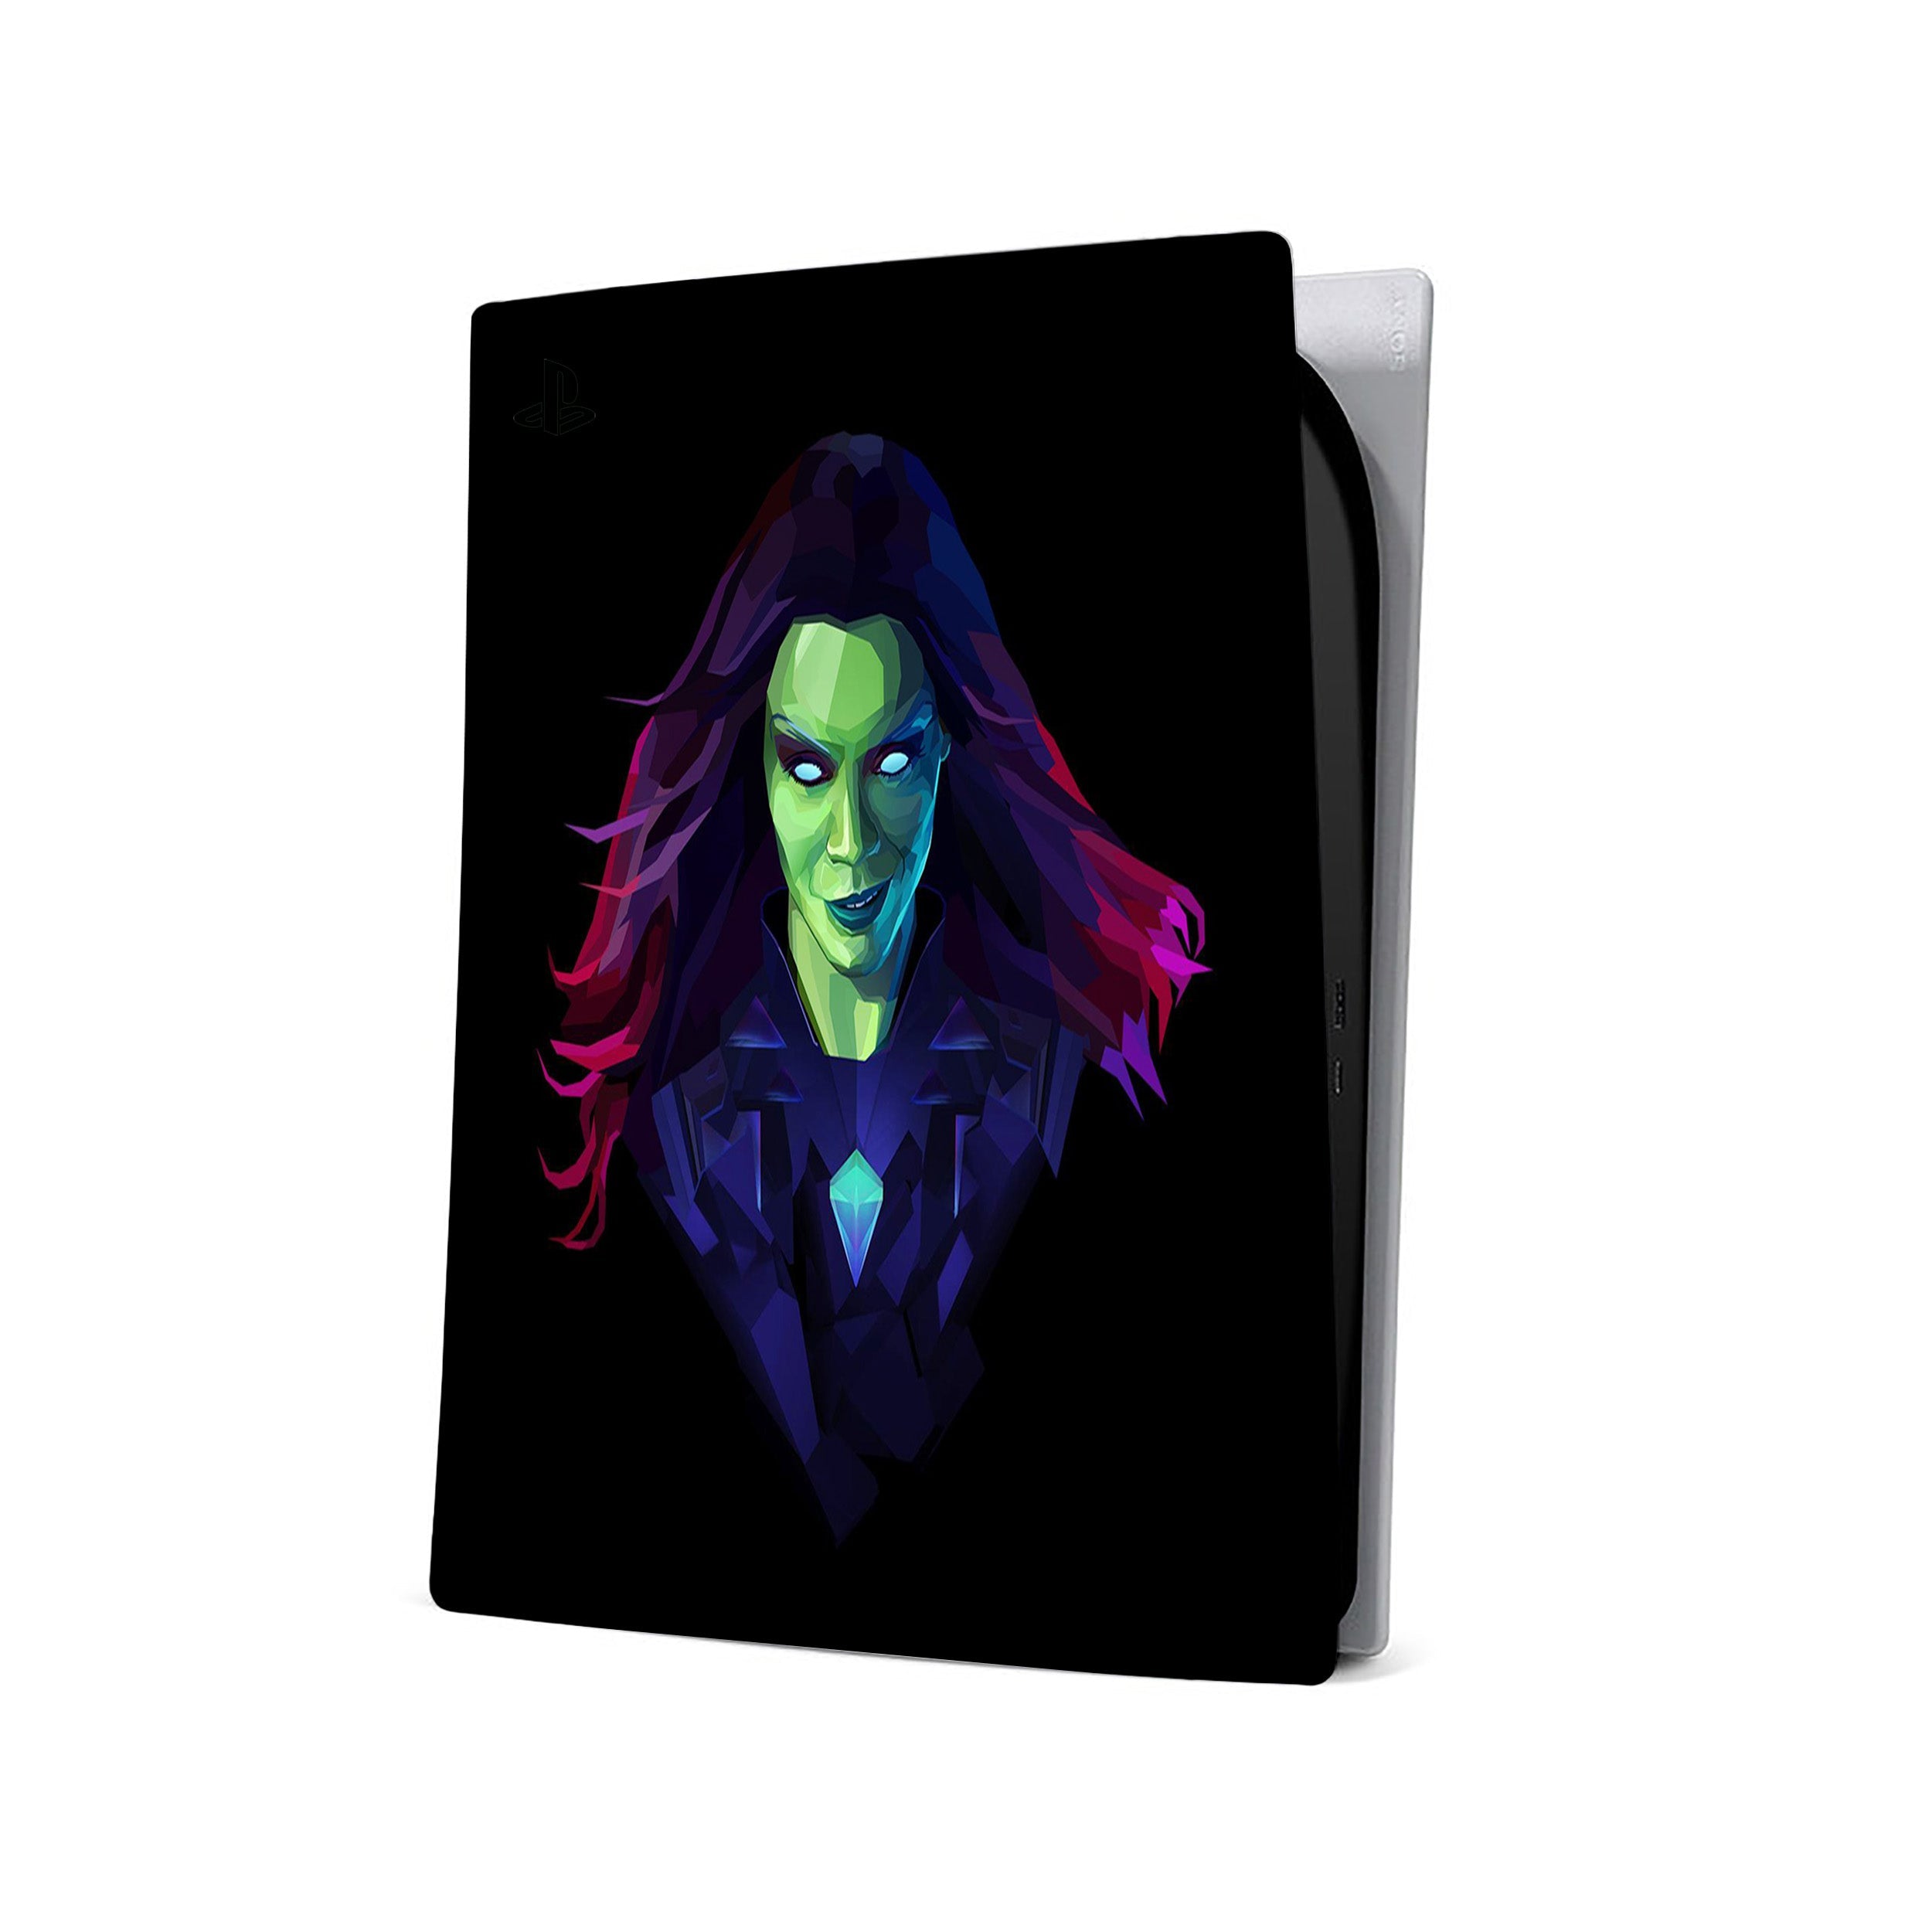 A video game skin featuring a Marvel Guardians of the Galaxy Gamora design for the PS5.